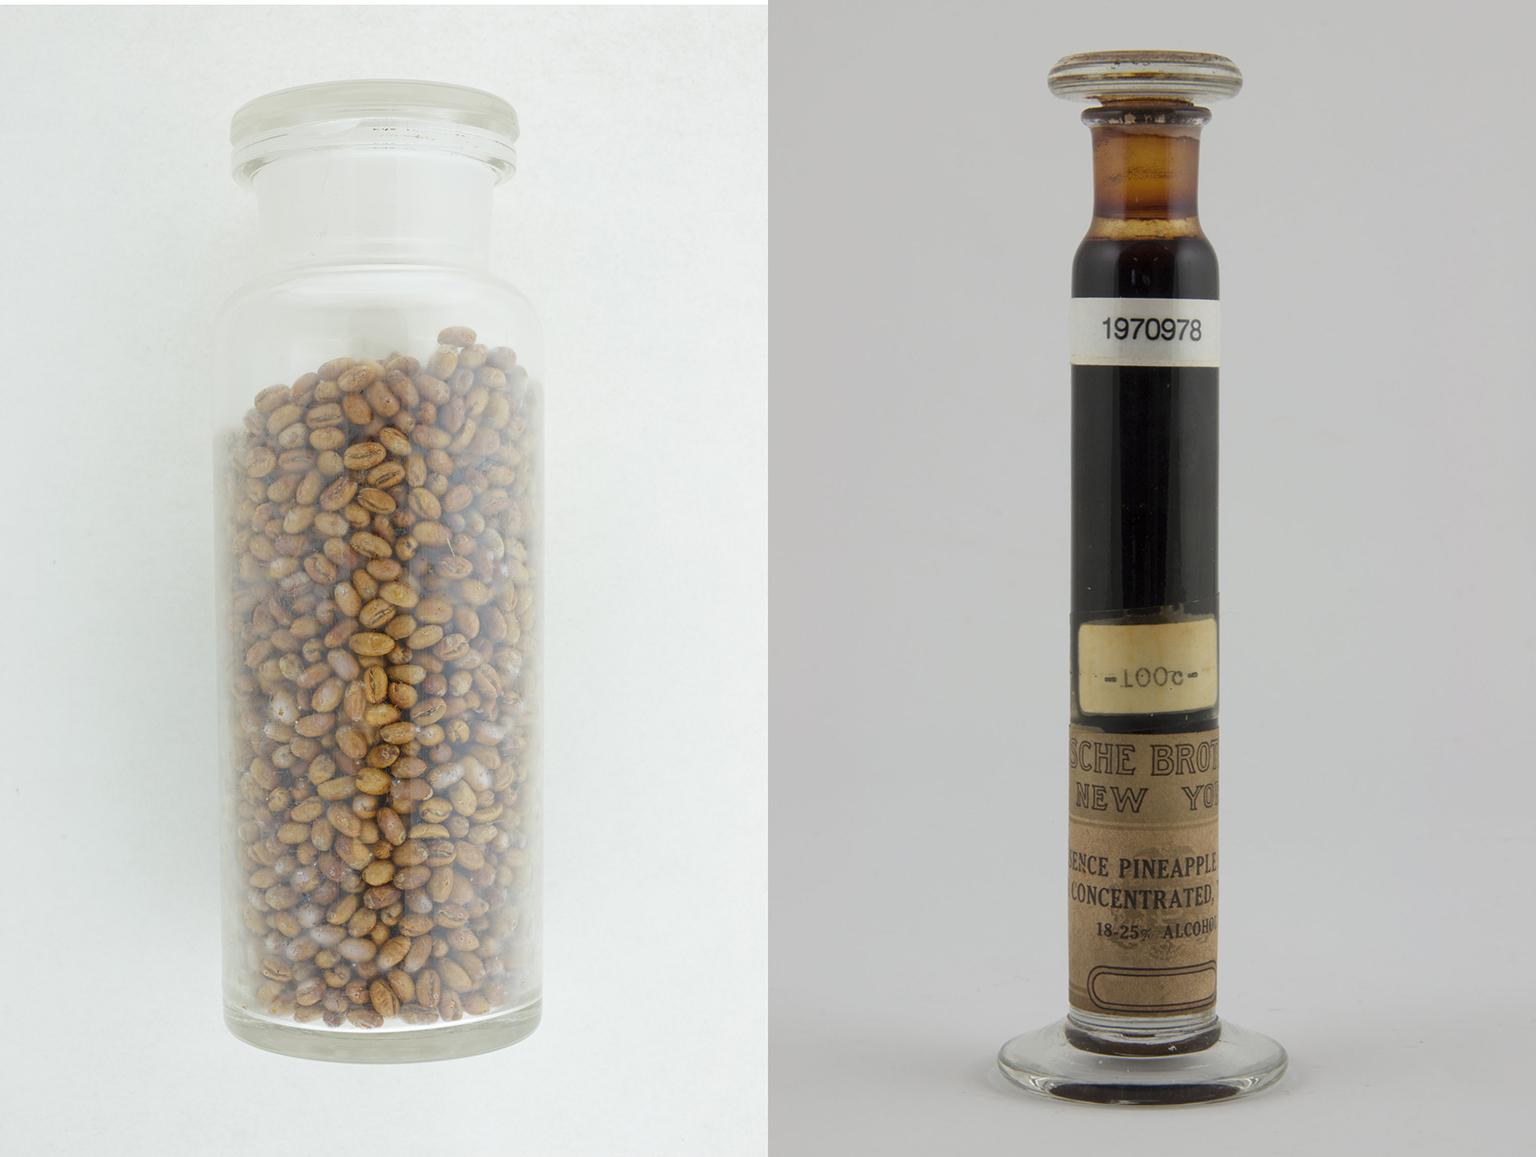 Samples of Jamaica Blue Mountain Coffee, left, and pineapple from the Field Museum’s collection of historical specimens. (Courtesy The Field Museum)